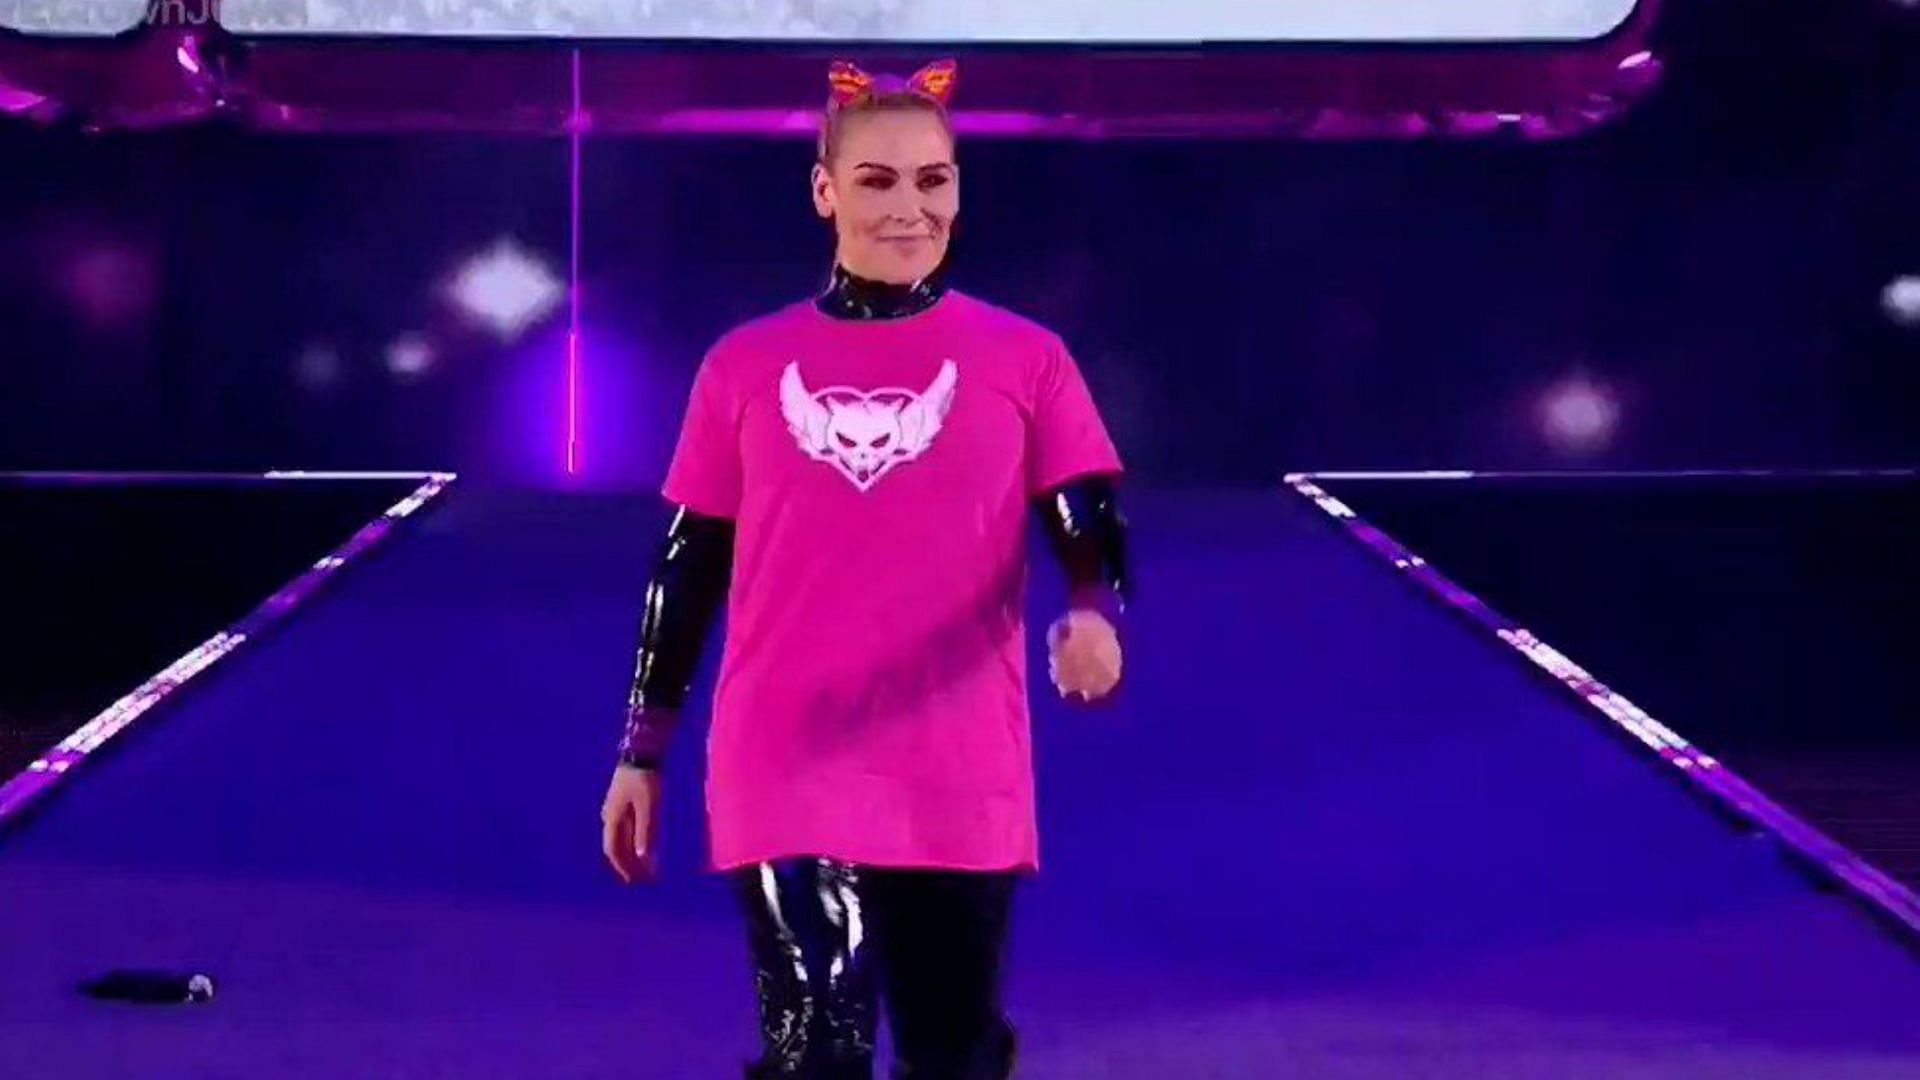 A fan threw a water bottle at Natalya at Crown Jewel in 2019